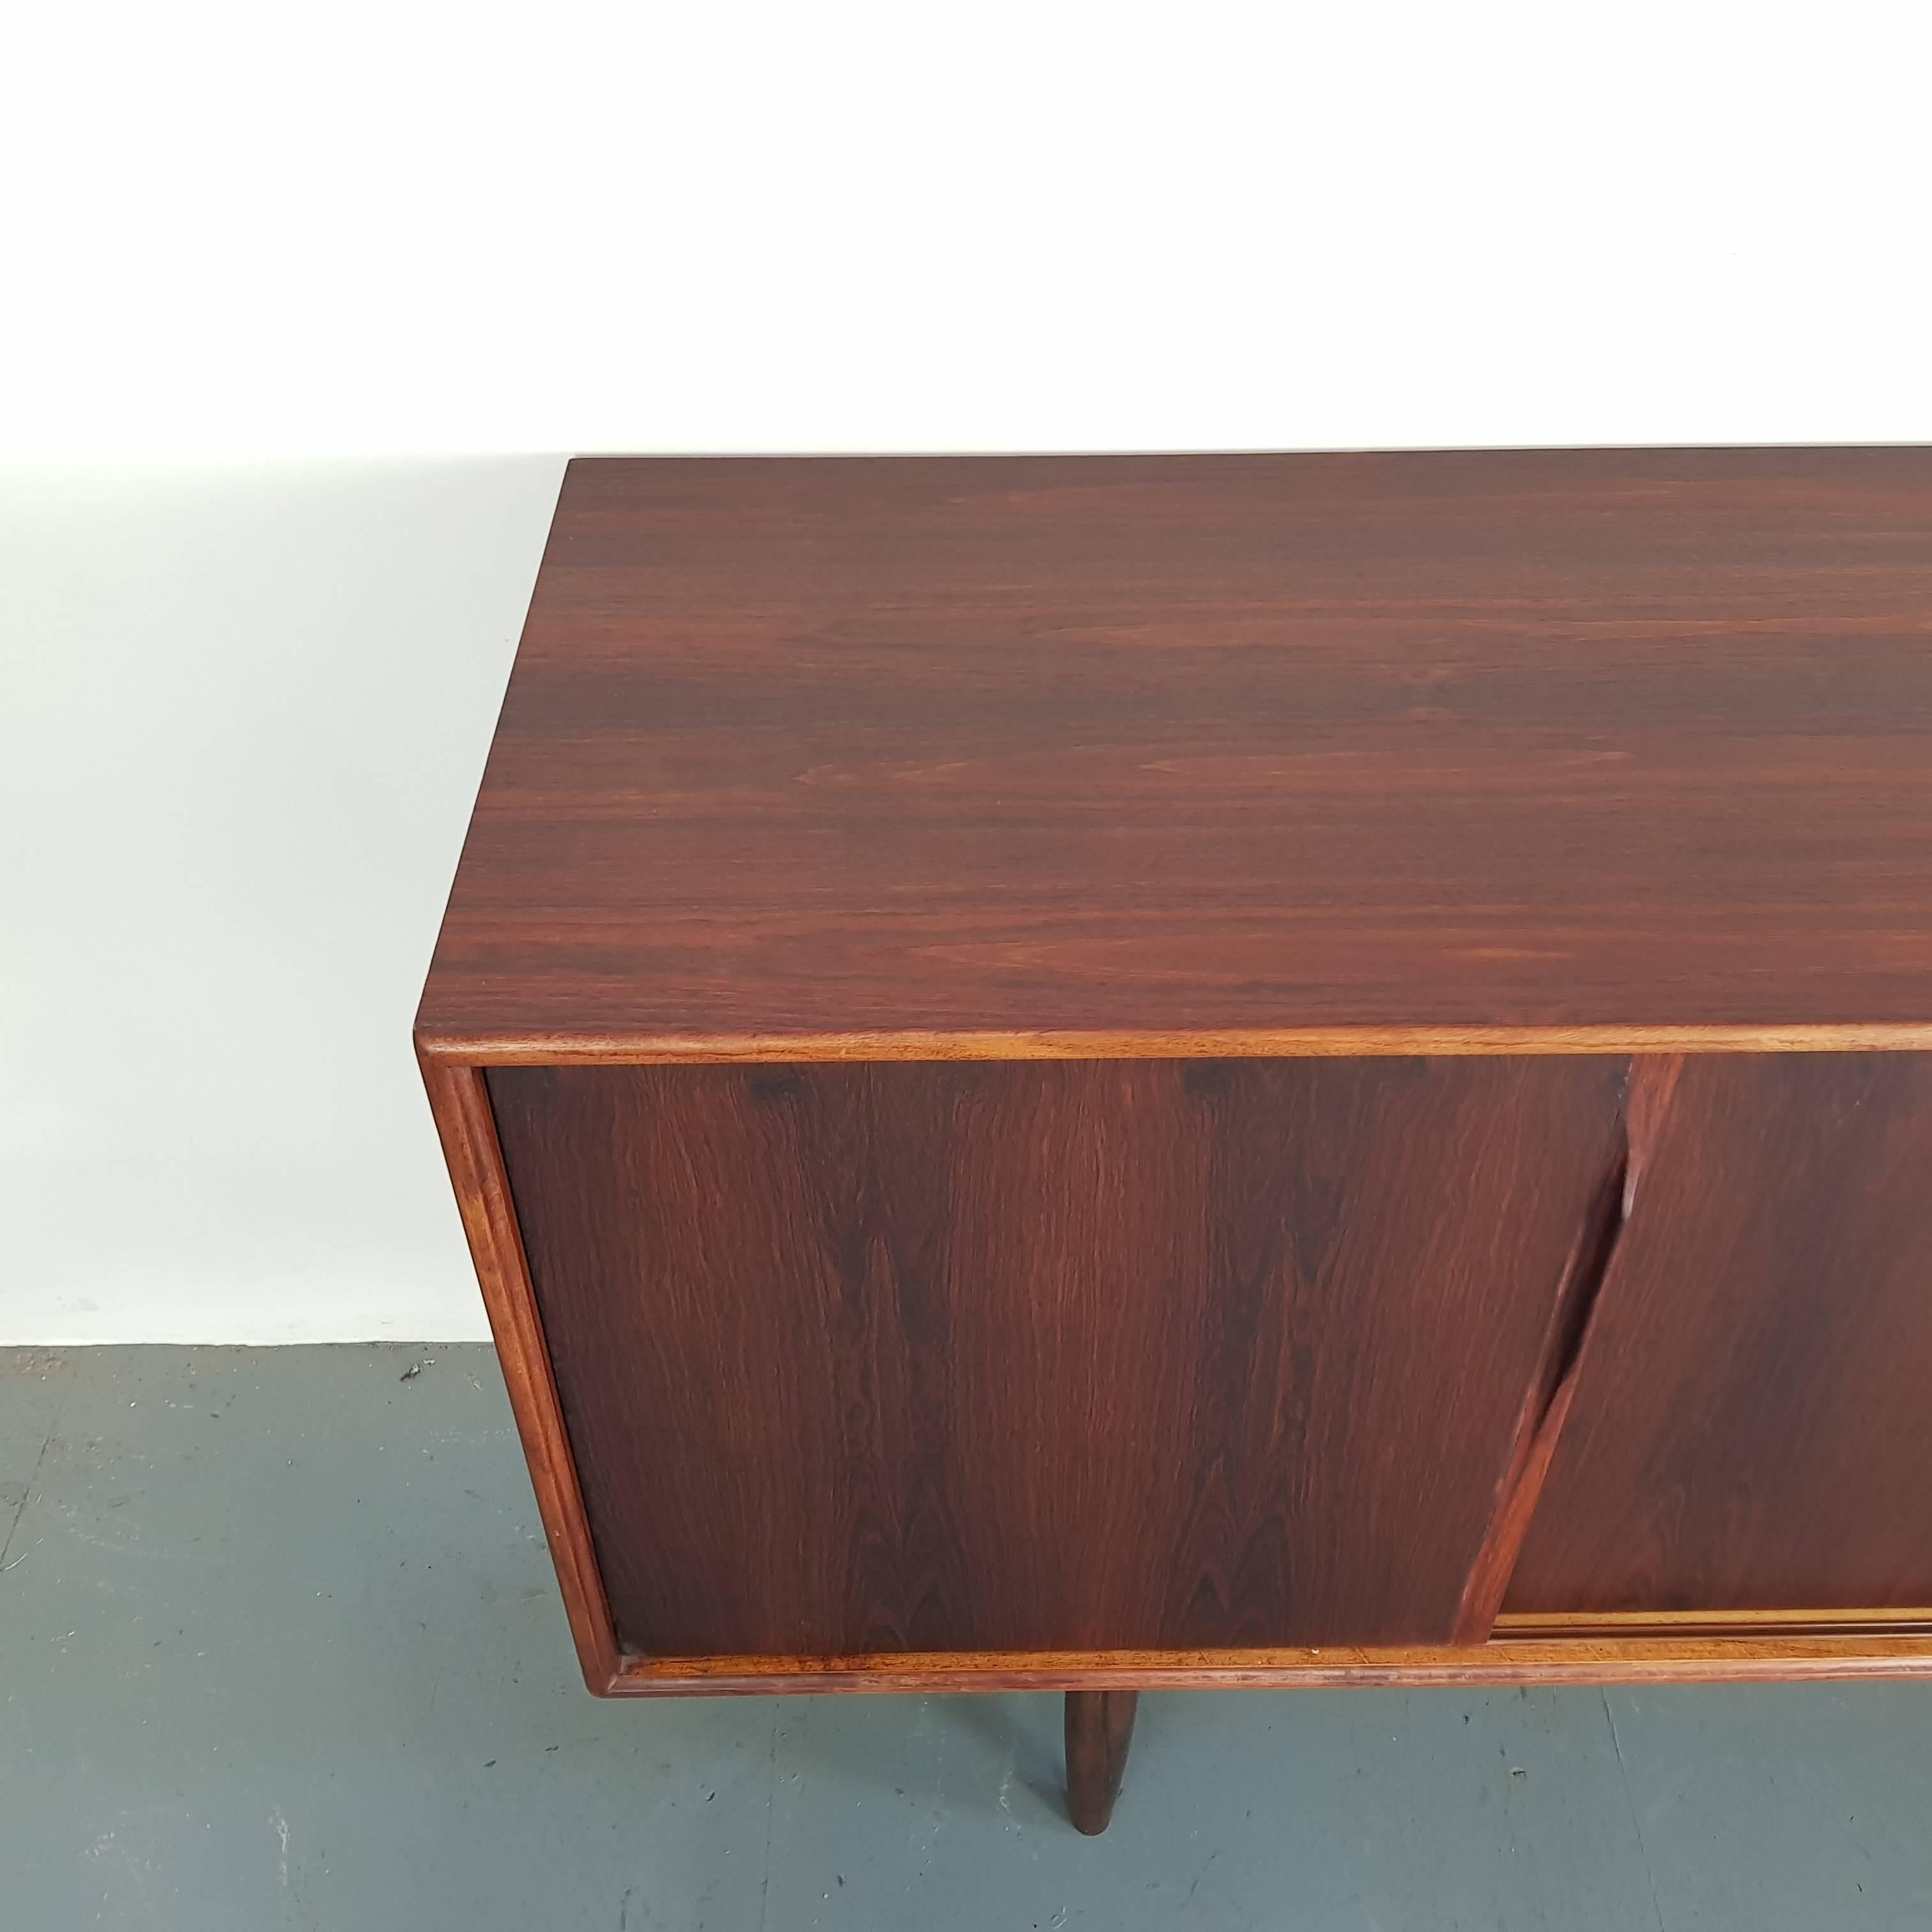 Vintage Midcentury Danish Rosewood Sideboard Designed by Gunni Omann In Good Condition For Sale In Lewes, East Sussex